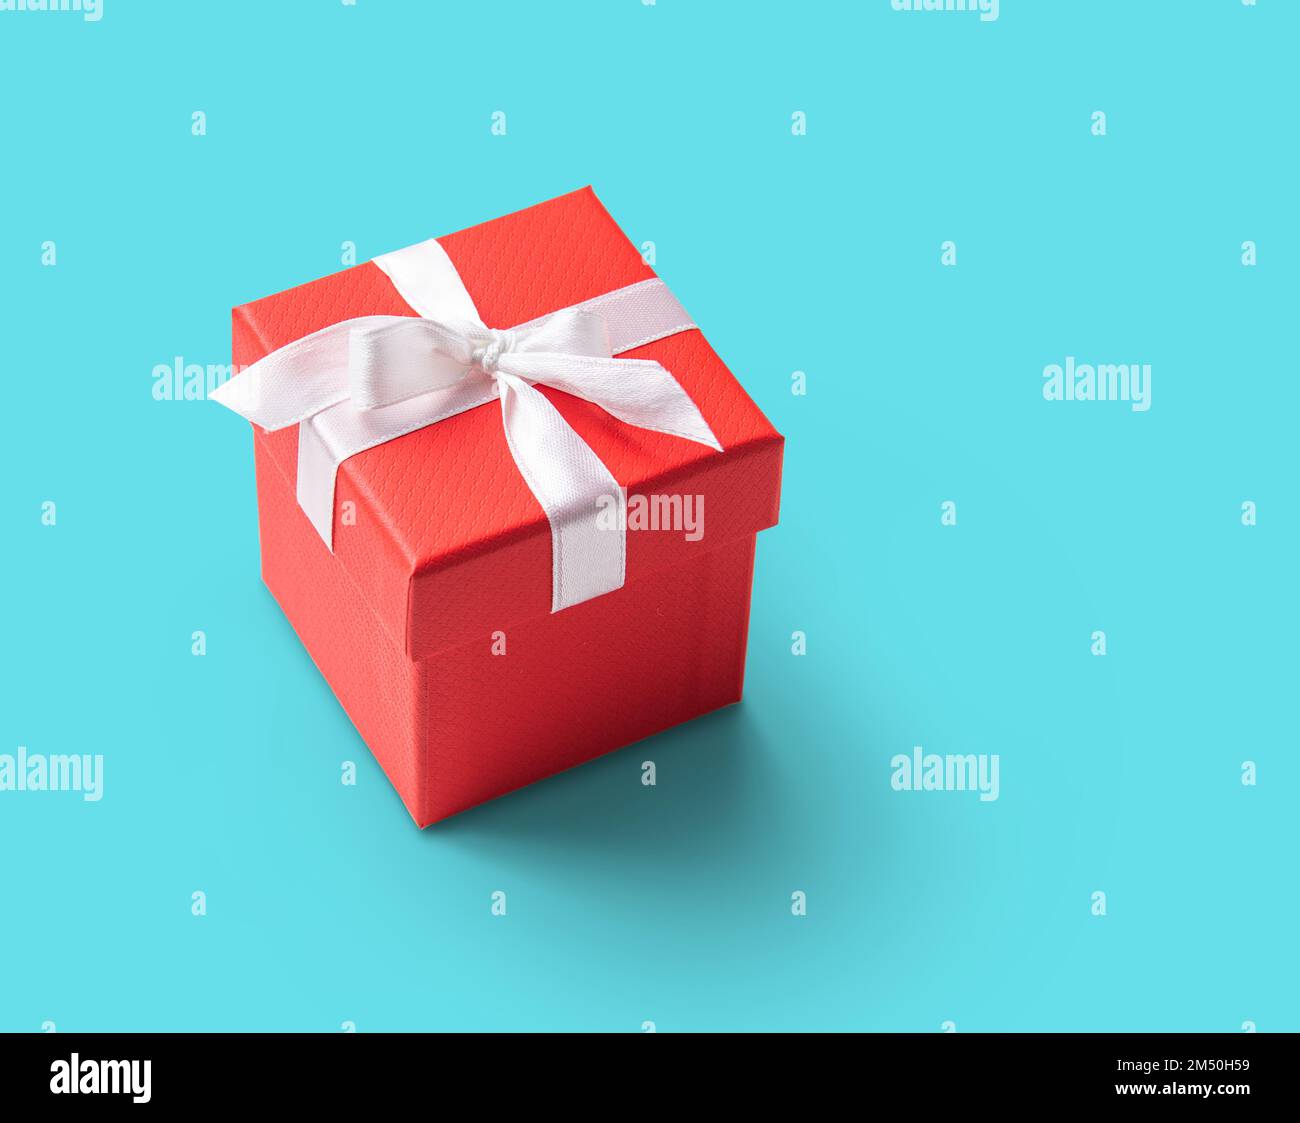 red present box with white ribbon on  blue background. Concept and celebration photo. Copy space Stock Photo